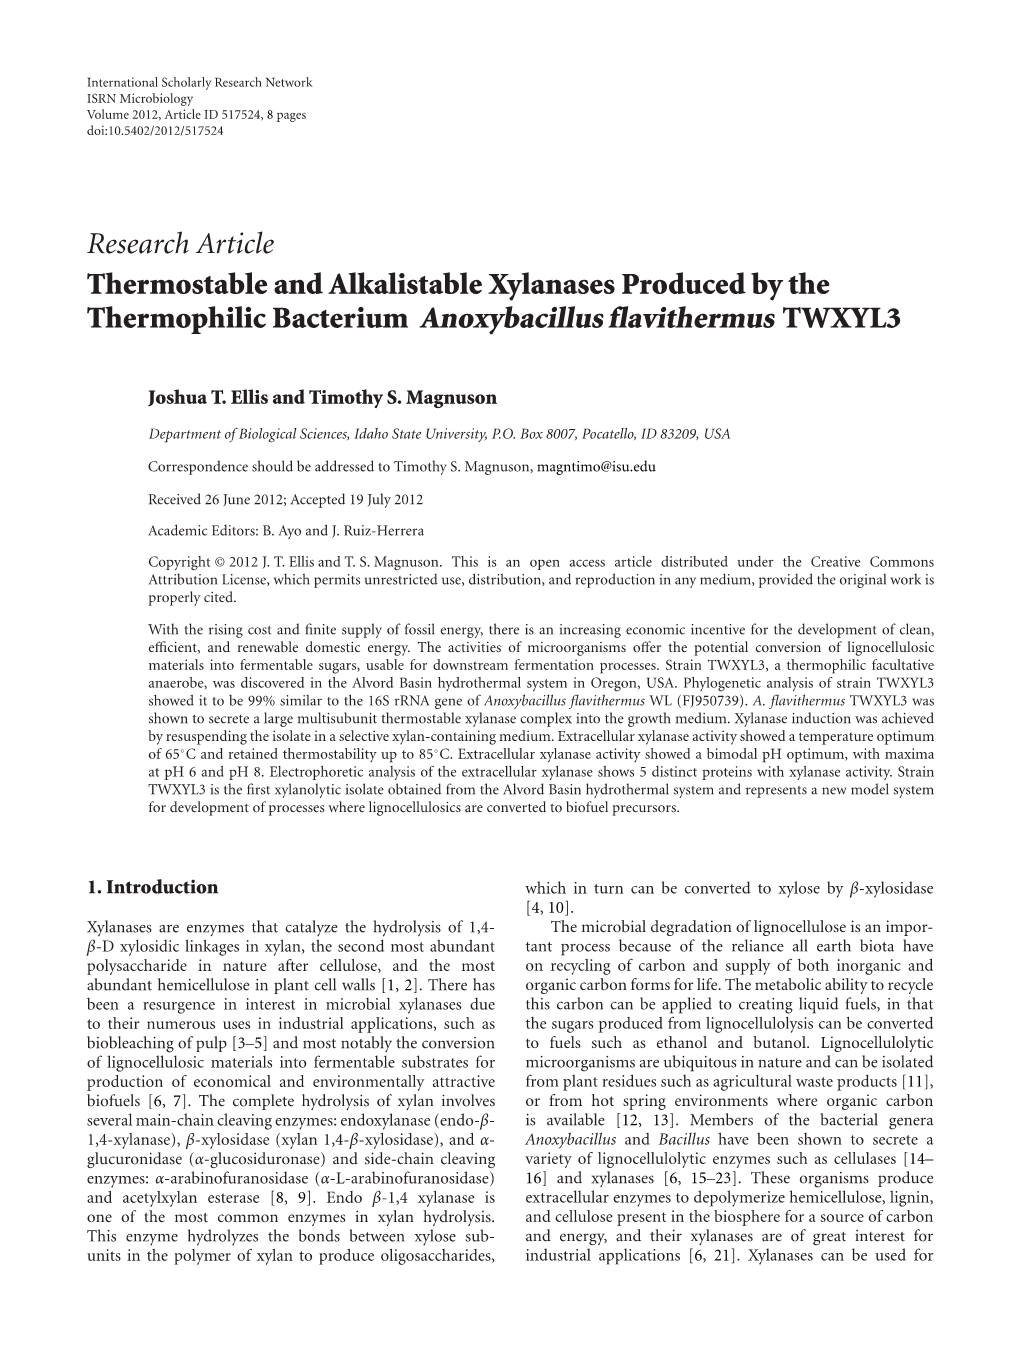 Research Article Thermostable and Alkalistable Xylanases Produced by the Thermophilic Bacterium Anoxybacillus Flavithermus TWXYL3